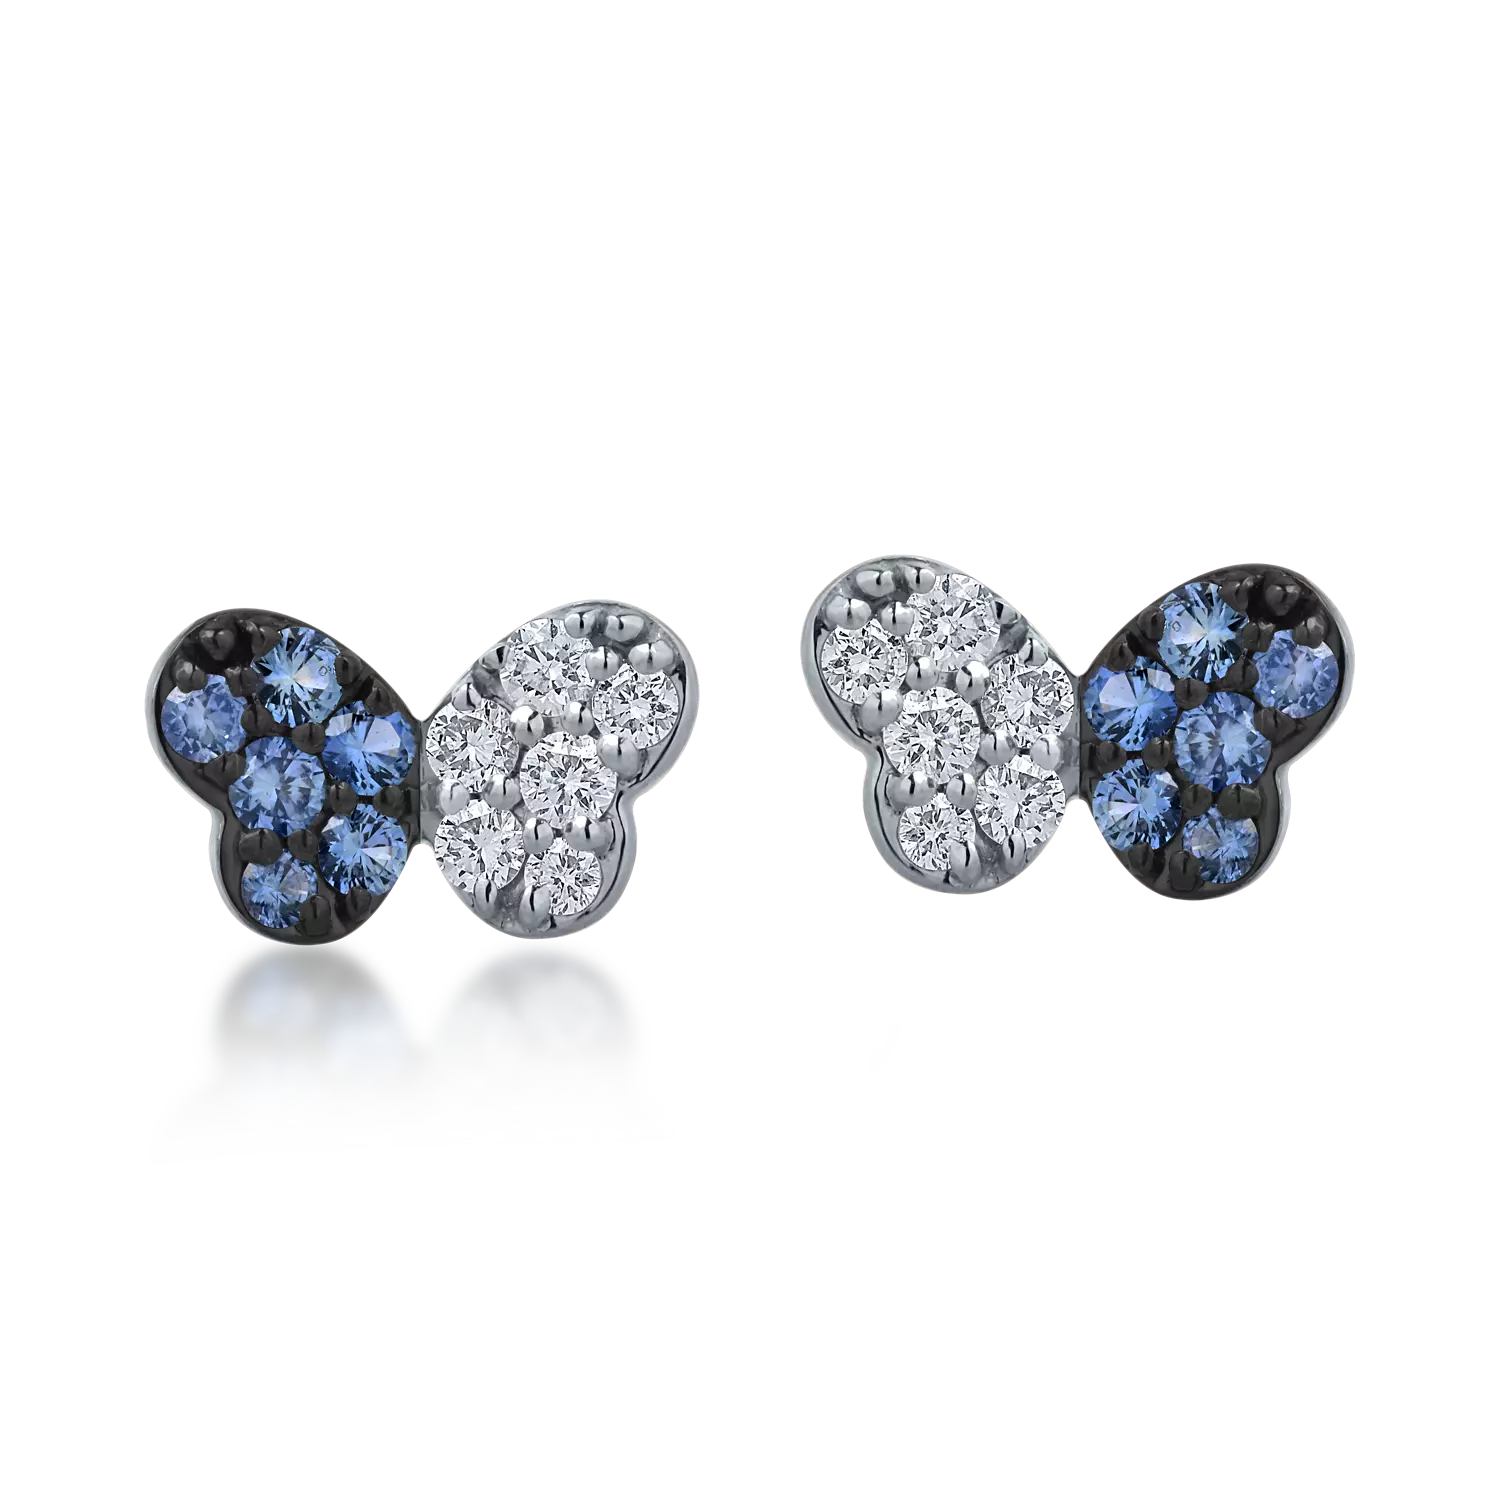 White gold butterflies earrings with 0.16ct sapphires and 0.14ct diamonds